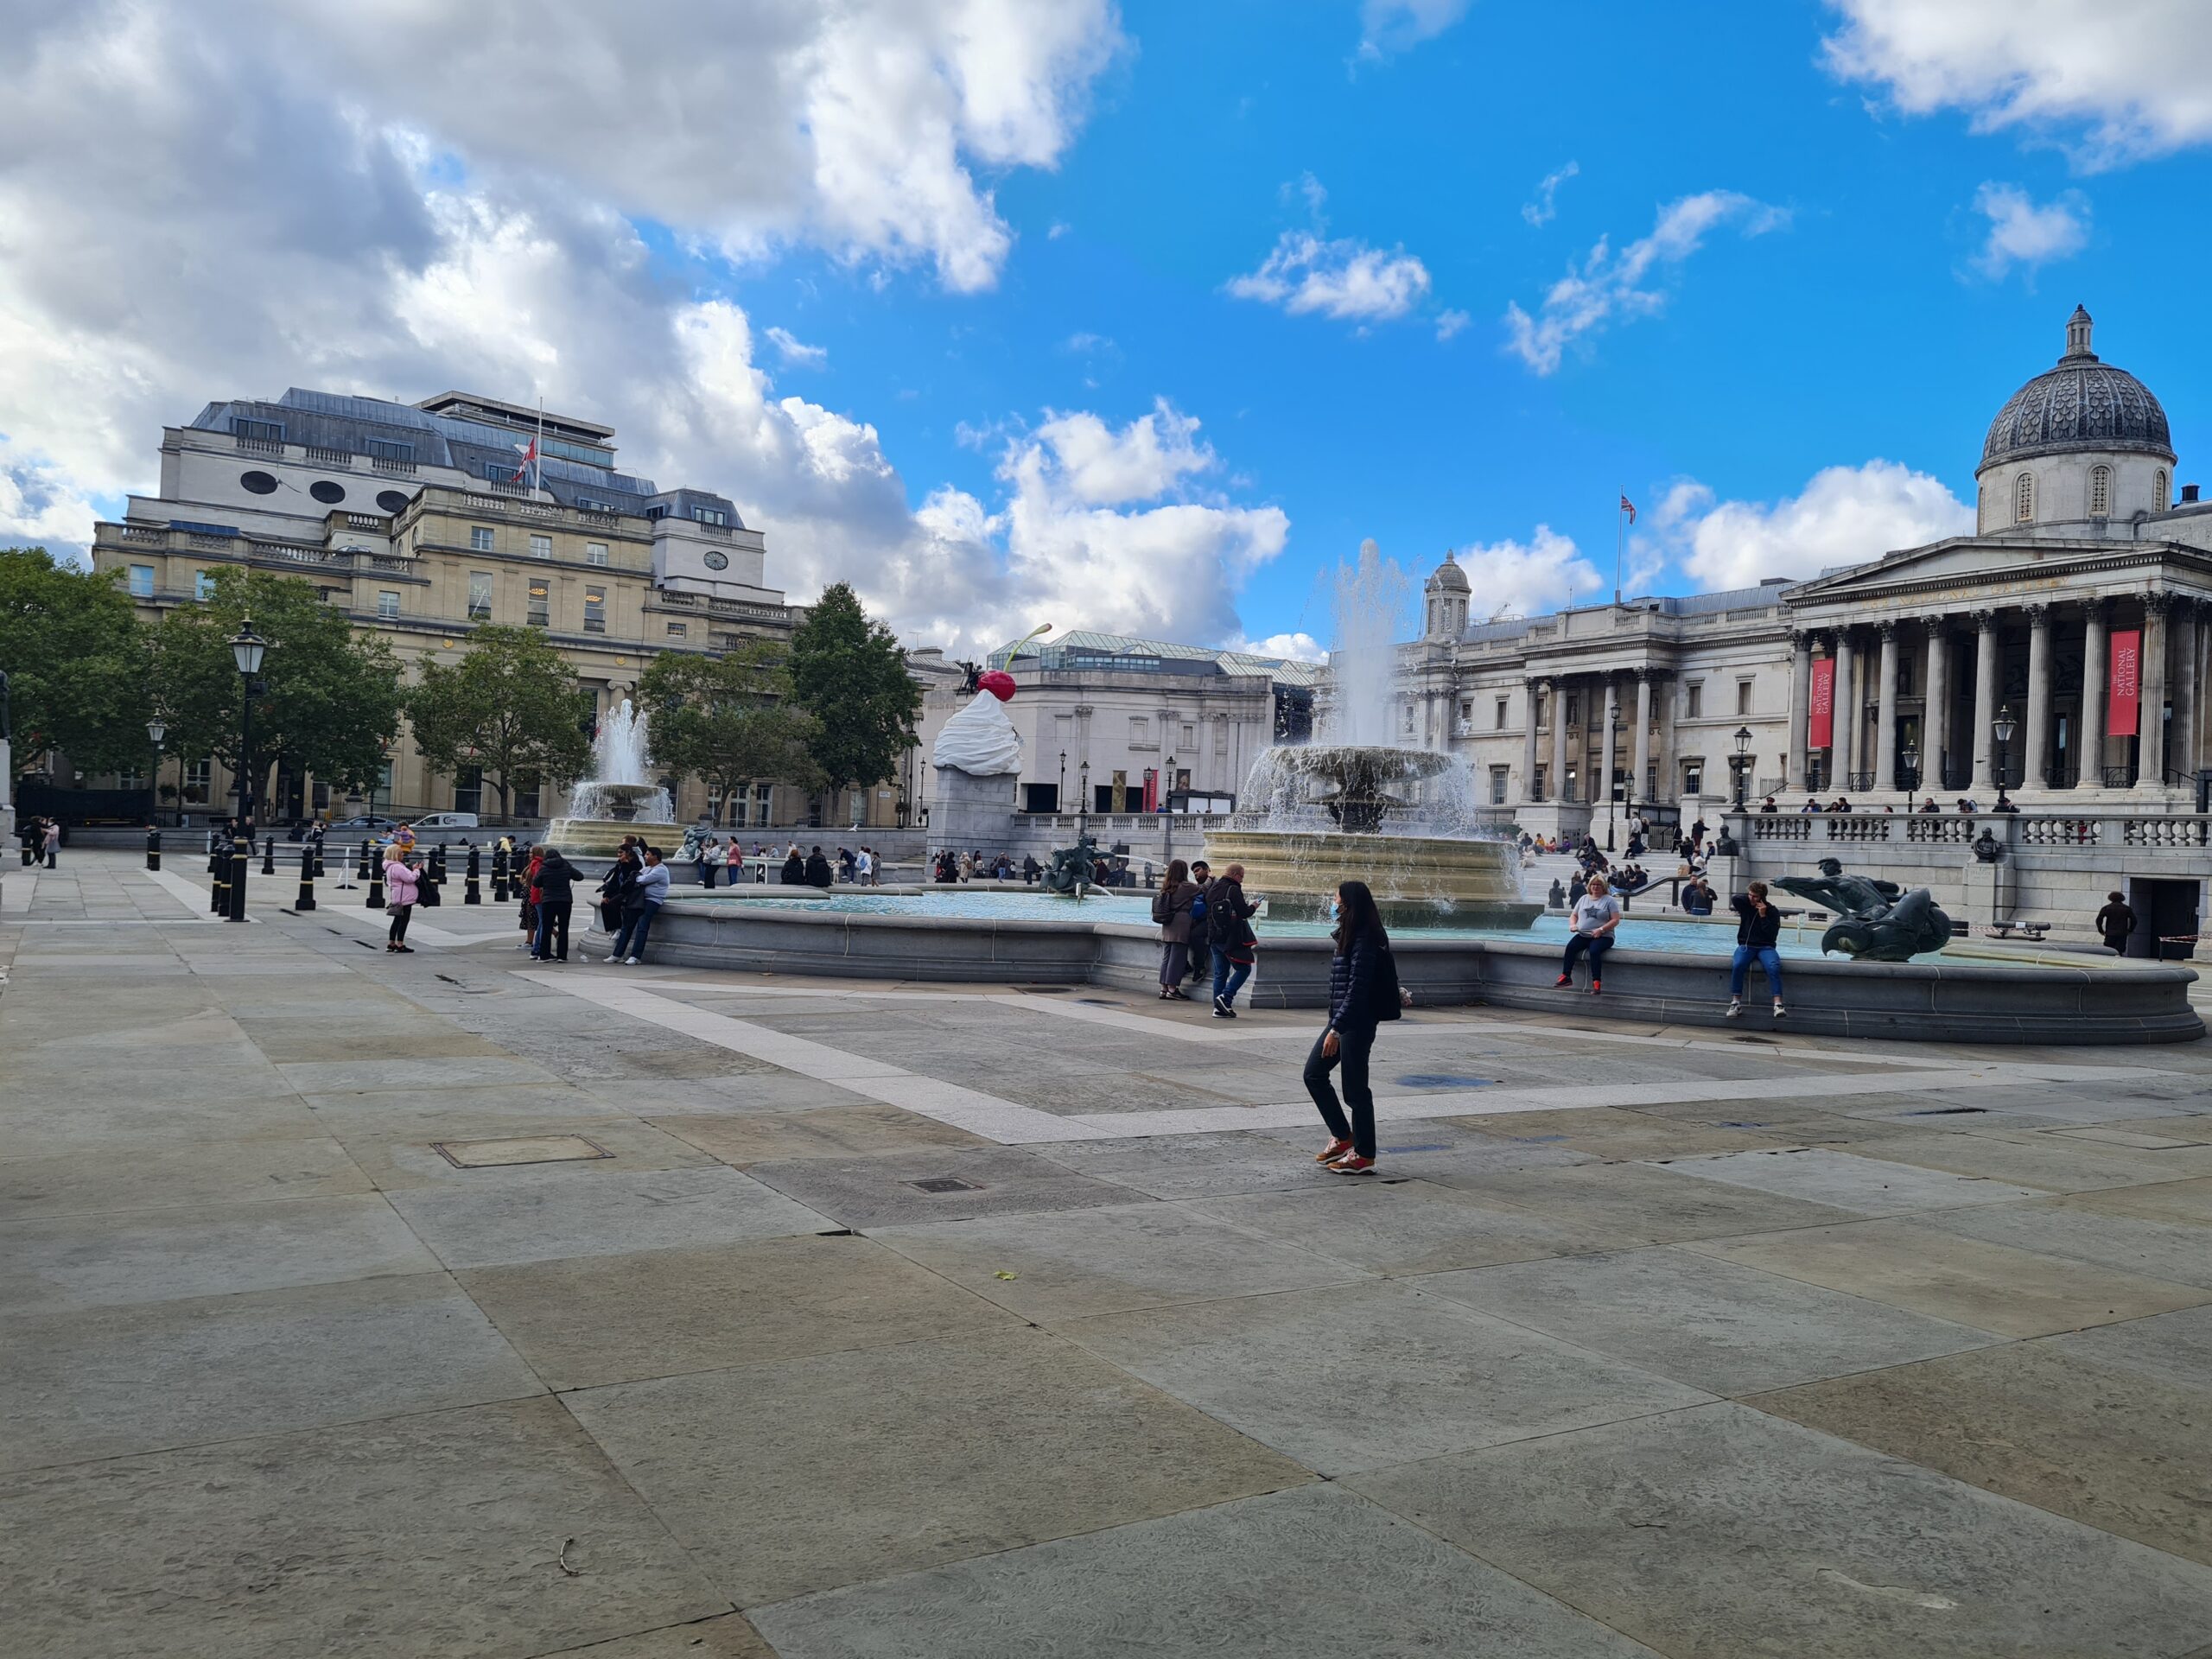 Replacement Pump for Trafalgar Square Water Fountain